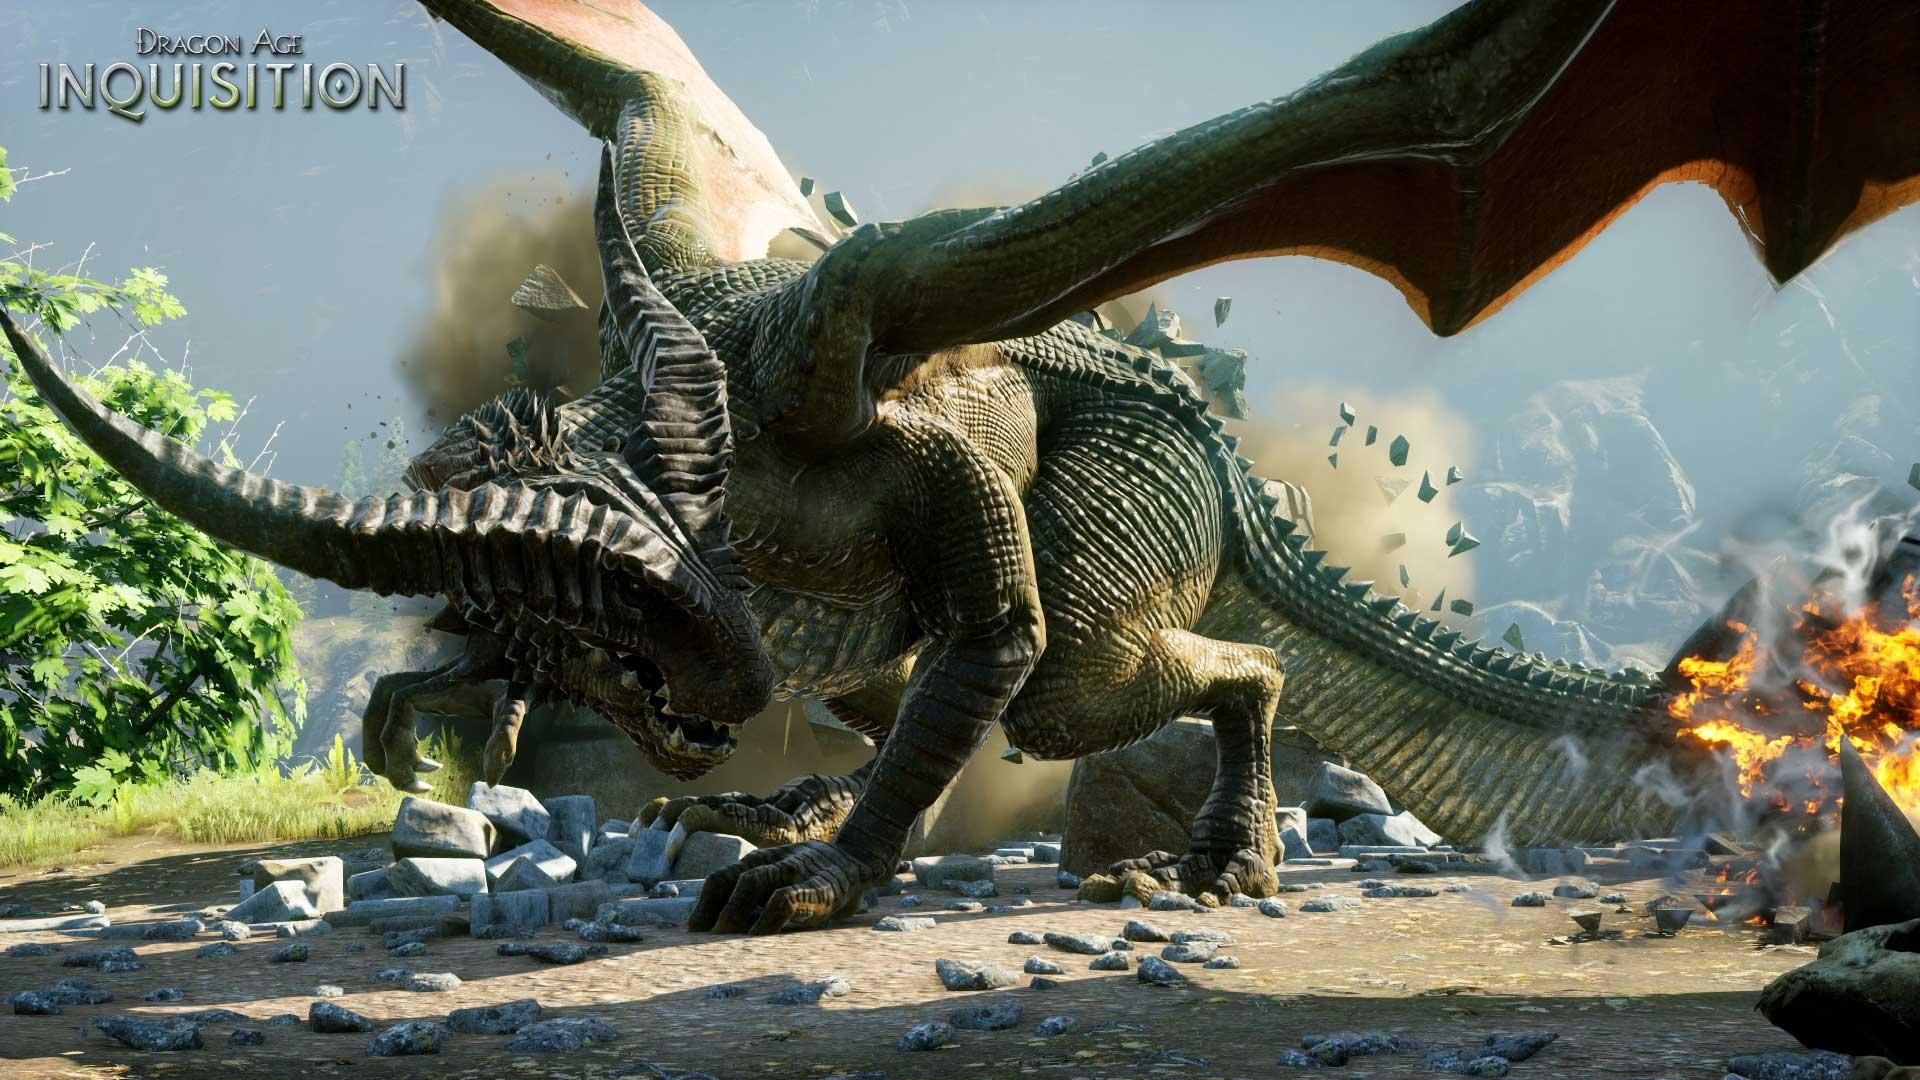 Make the Choice to Fight in This Dragon Age: Inquisition Combat Trailer